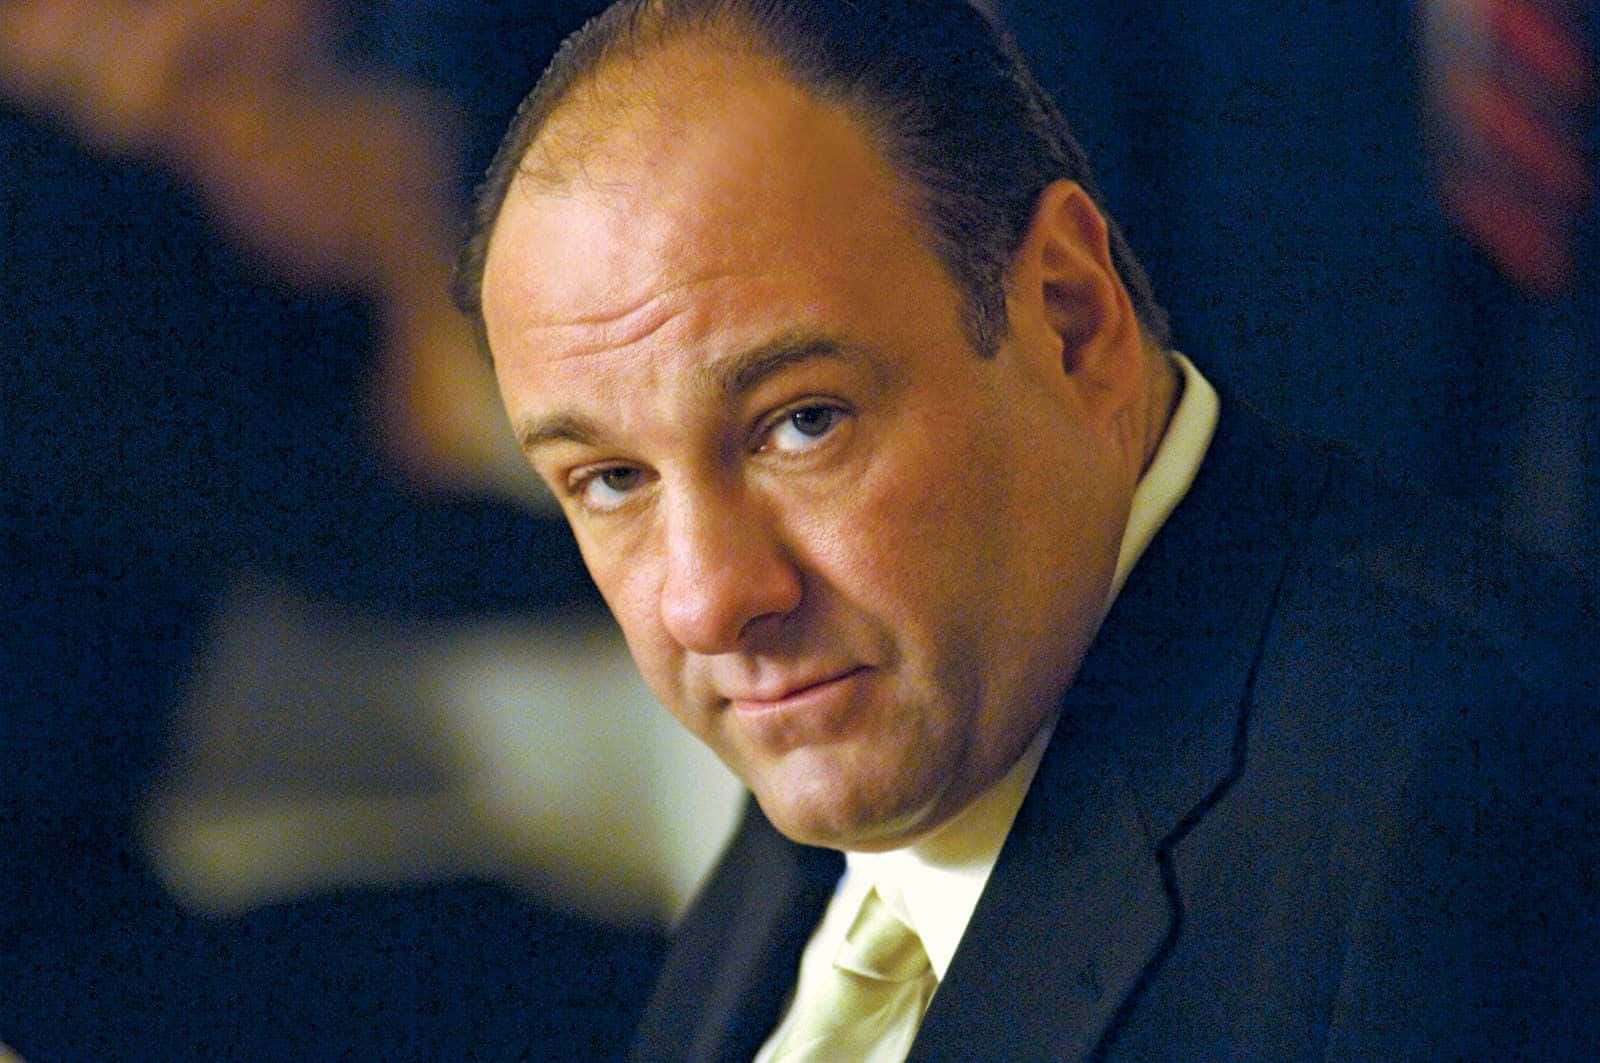 Jamesgandolfini Is An American Actor Best Known For His Role As Tony Soprano In The Tv Series 